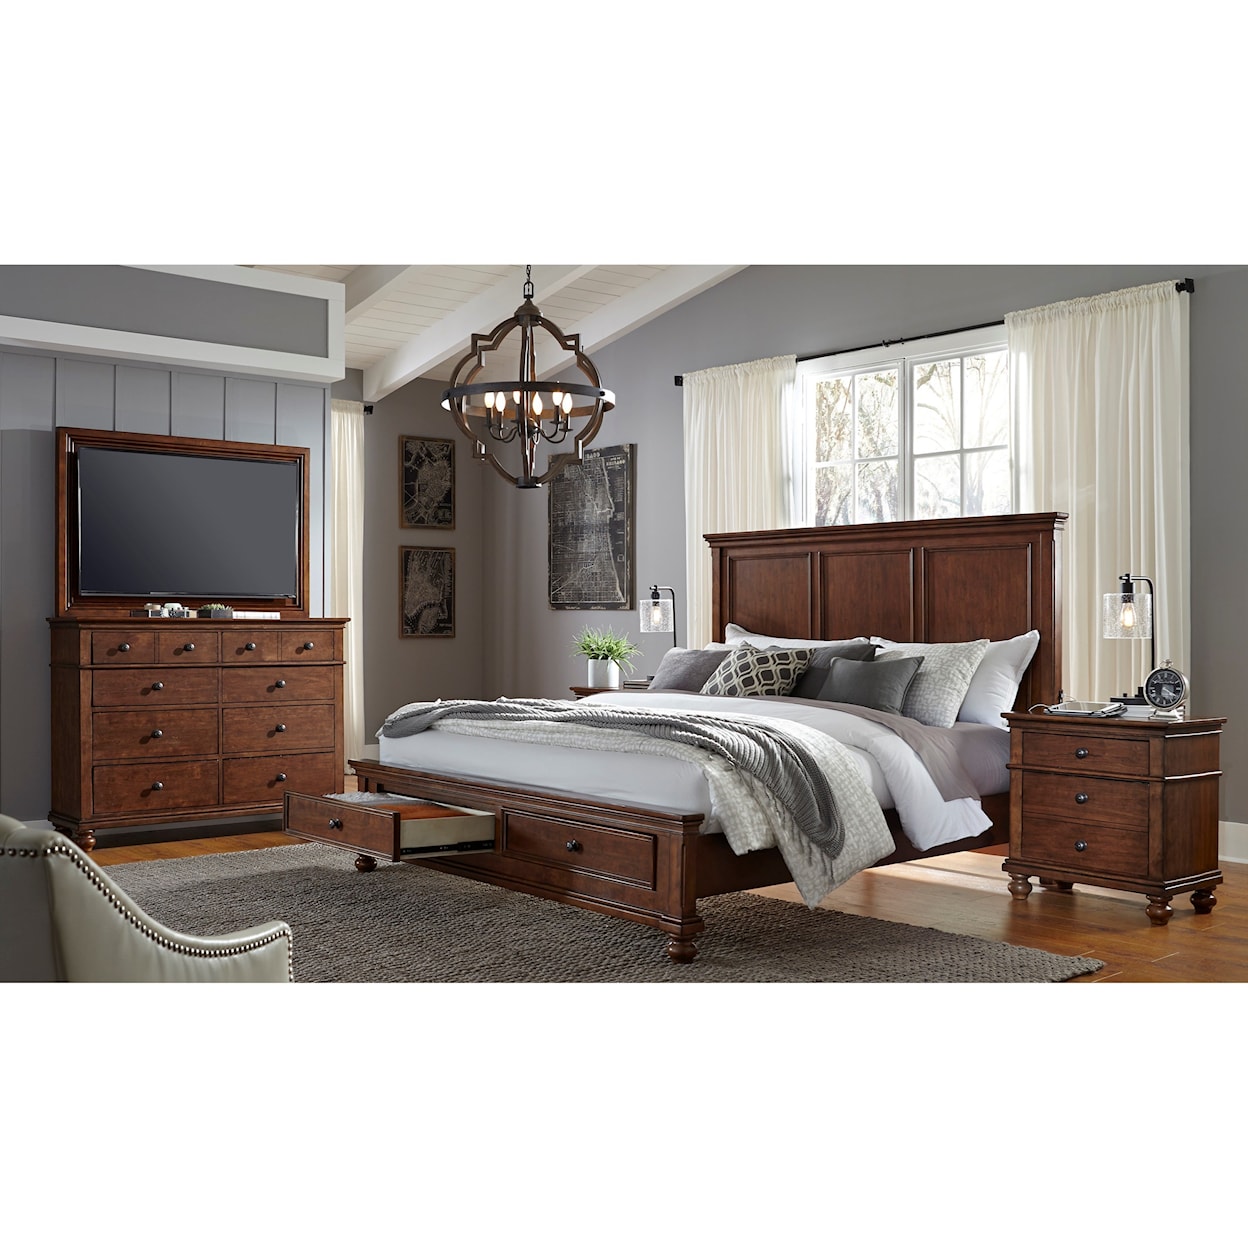 Aspenhome Oxford King Panel Storage Bed